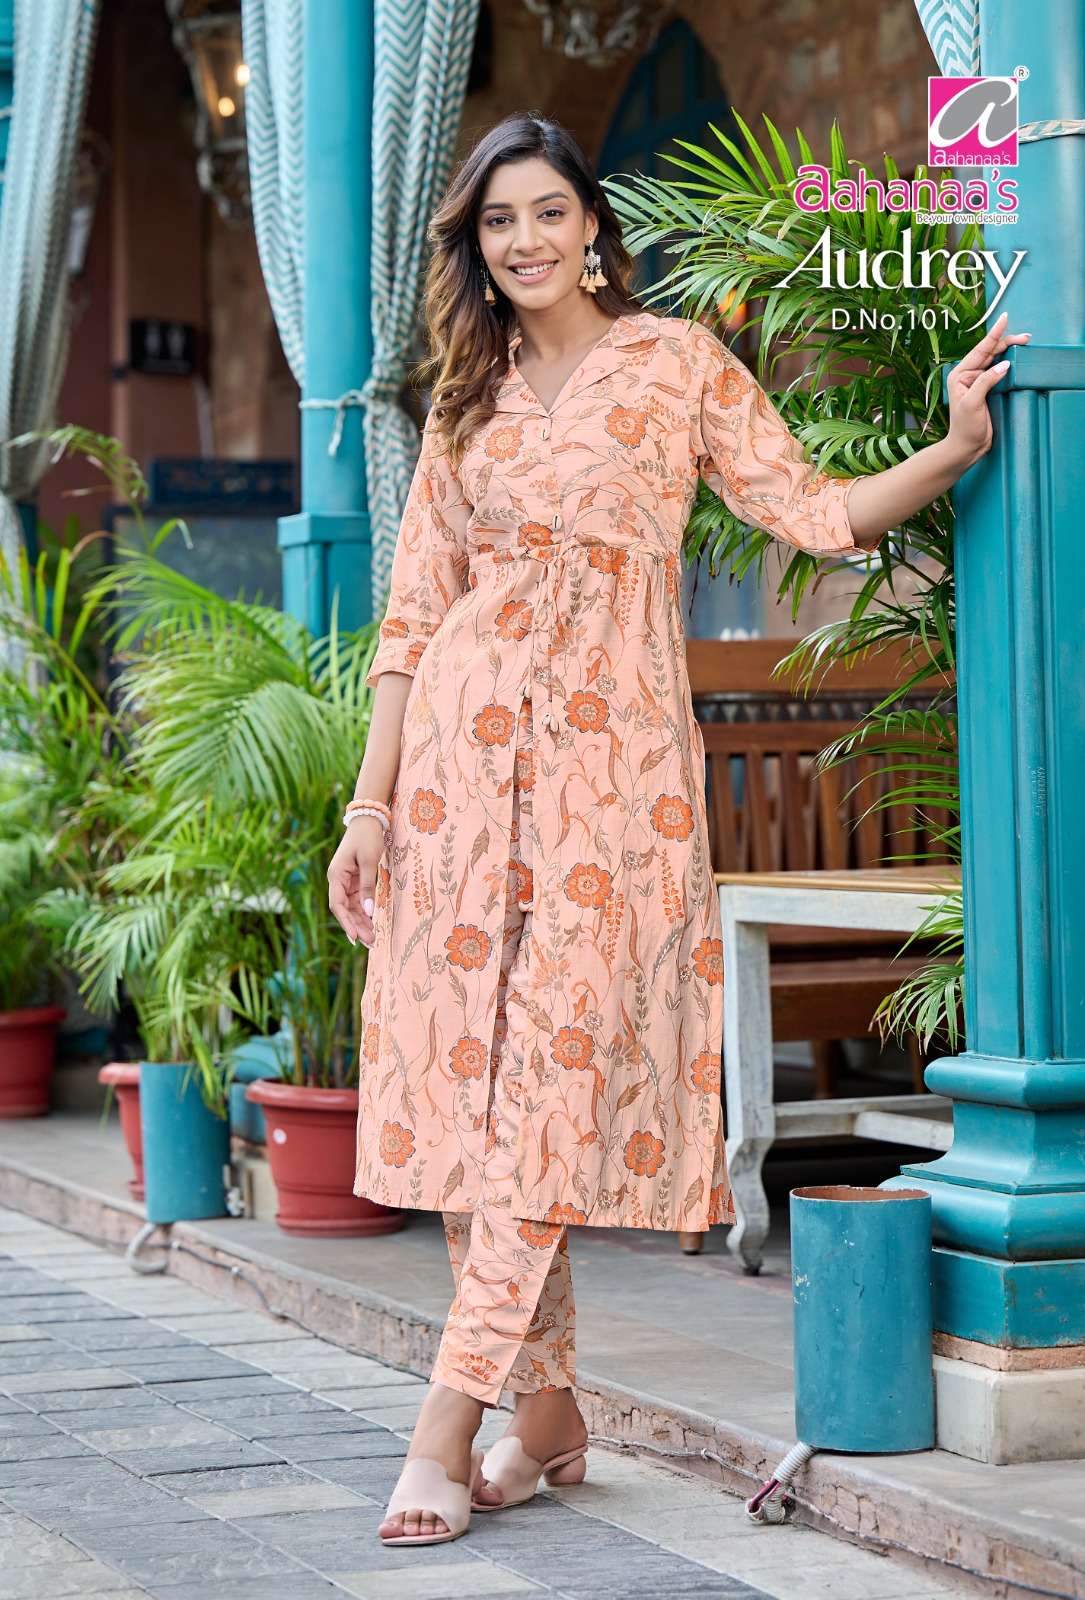 aahanaas catalogue audrey series designer concept coord sets exclusive designs exclusive patterns in hand sleeve and relaxing fits for all season coord set designer printed coord set 